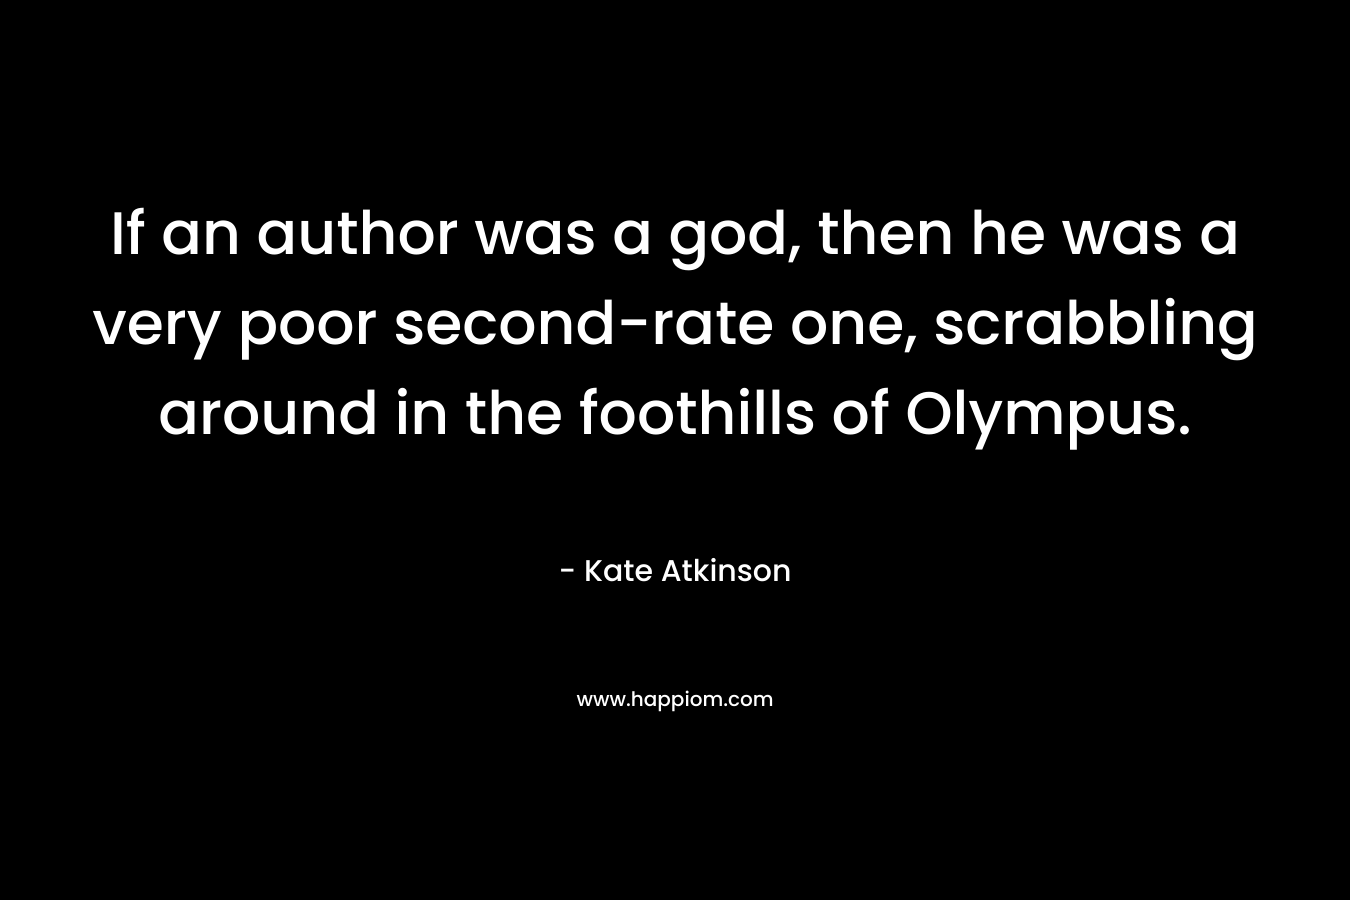 If an author was a god, then he was a very poor second-rate one, scrabbling around in the foothills of Olympus.